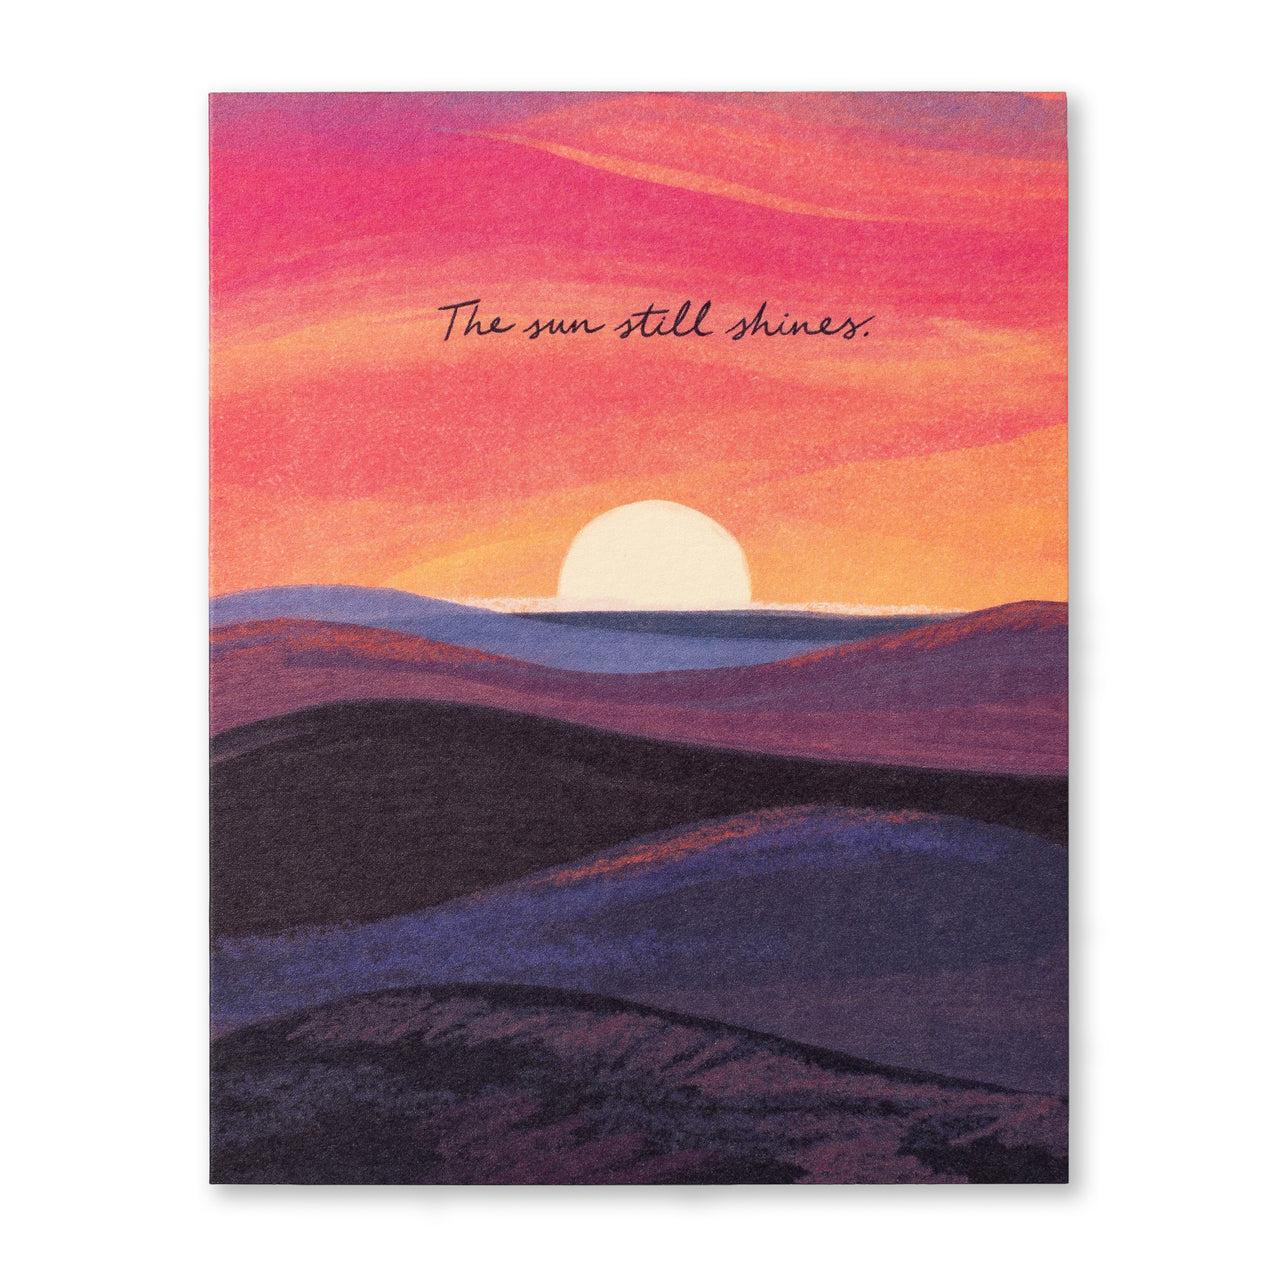 Love Muchly Greeting Card - Tough Times - The Sun Still Shines - Mellow Monkey